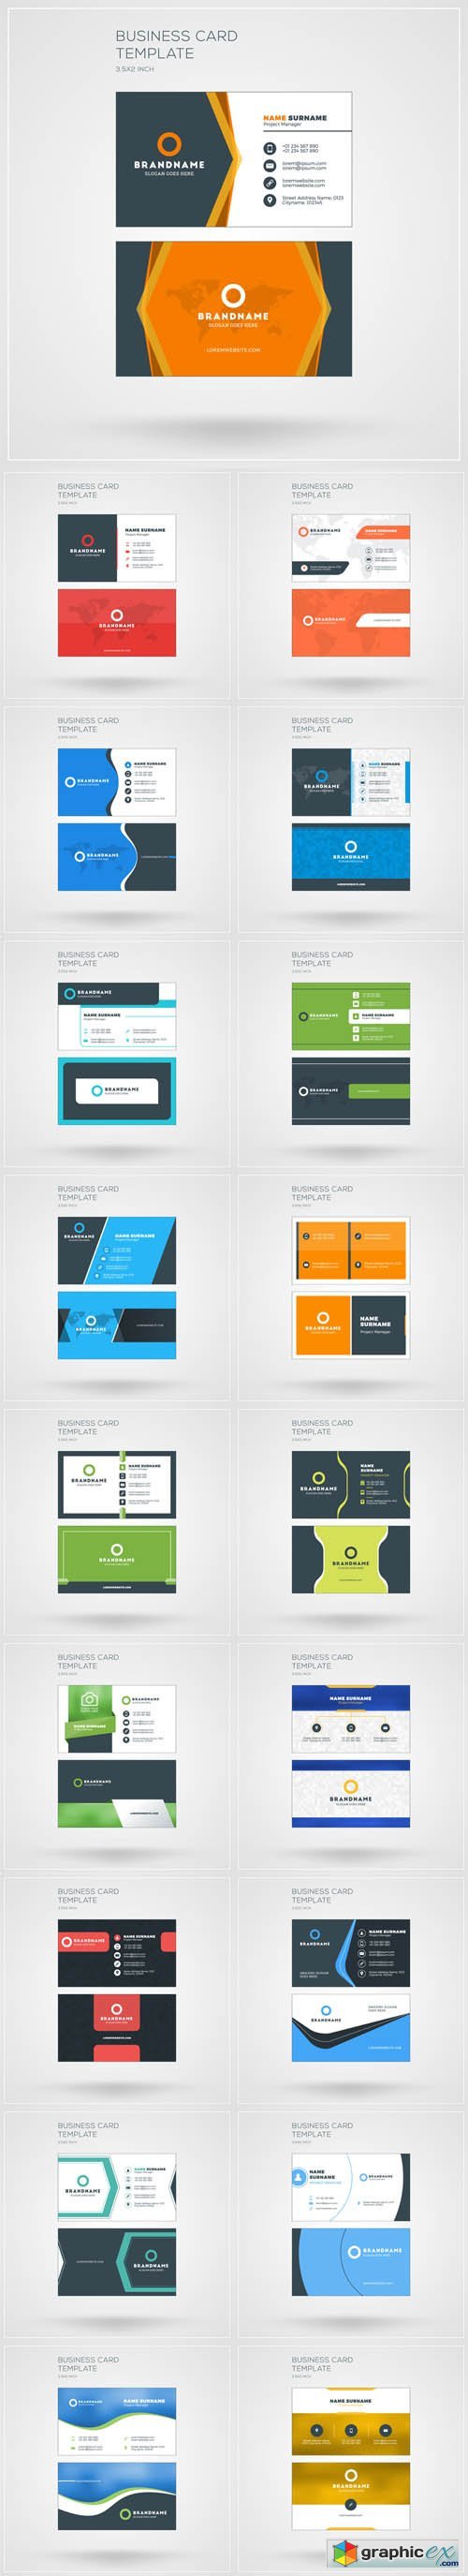 Business Card Templates with Company Logo